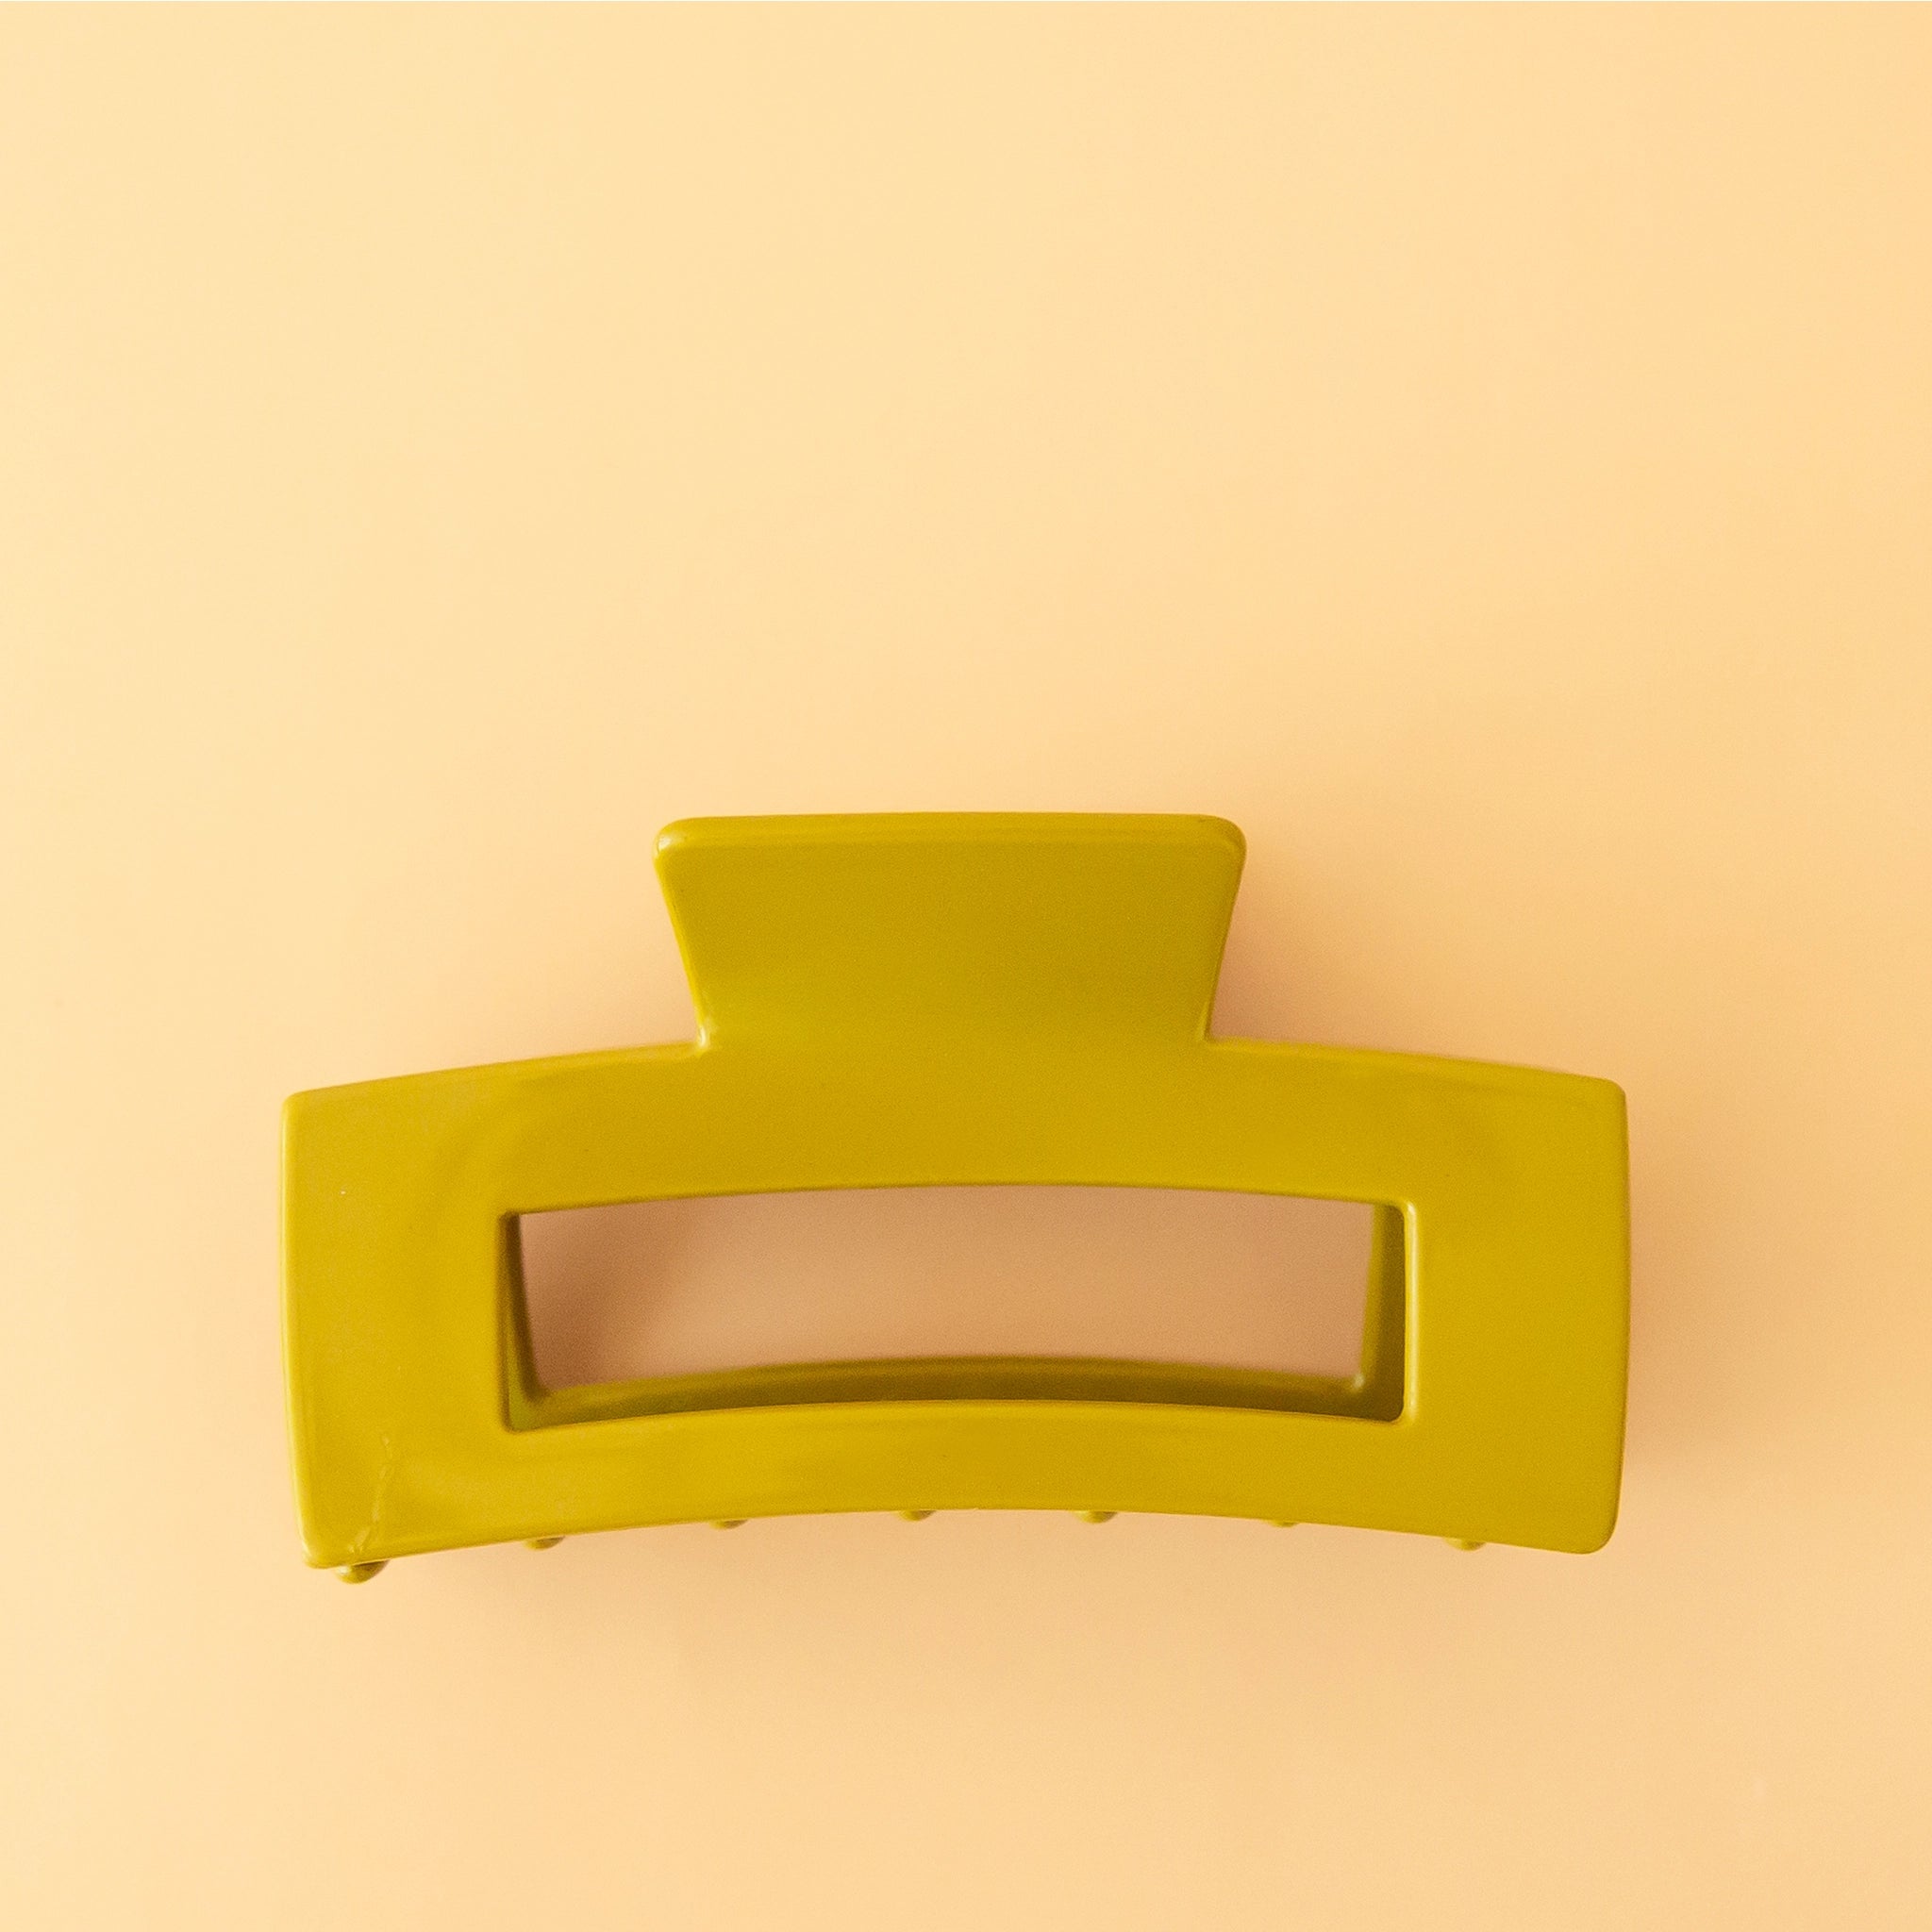 On a peachy background is the Havana Hair Claw in the shade Avocado which is a green rectangle shaped hair clip.